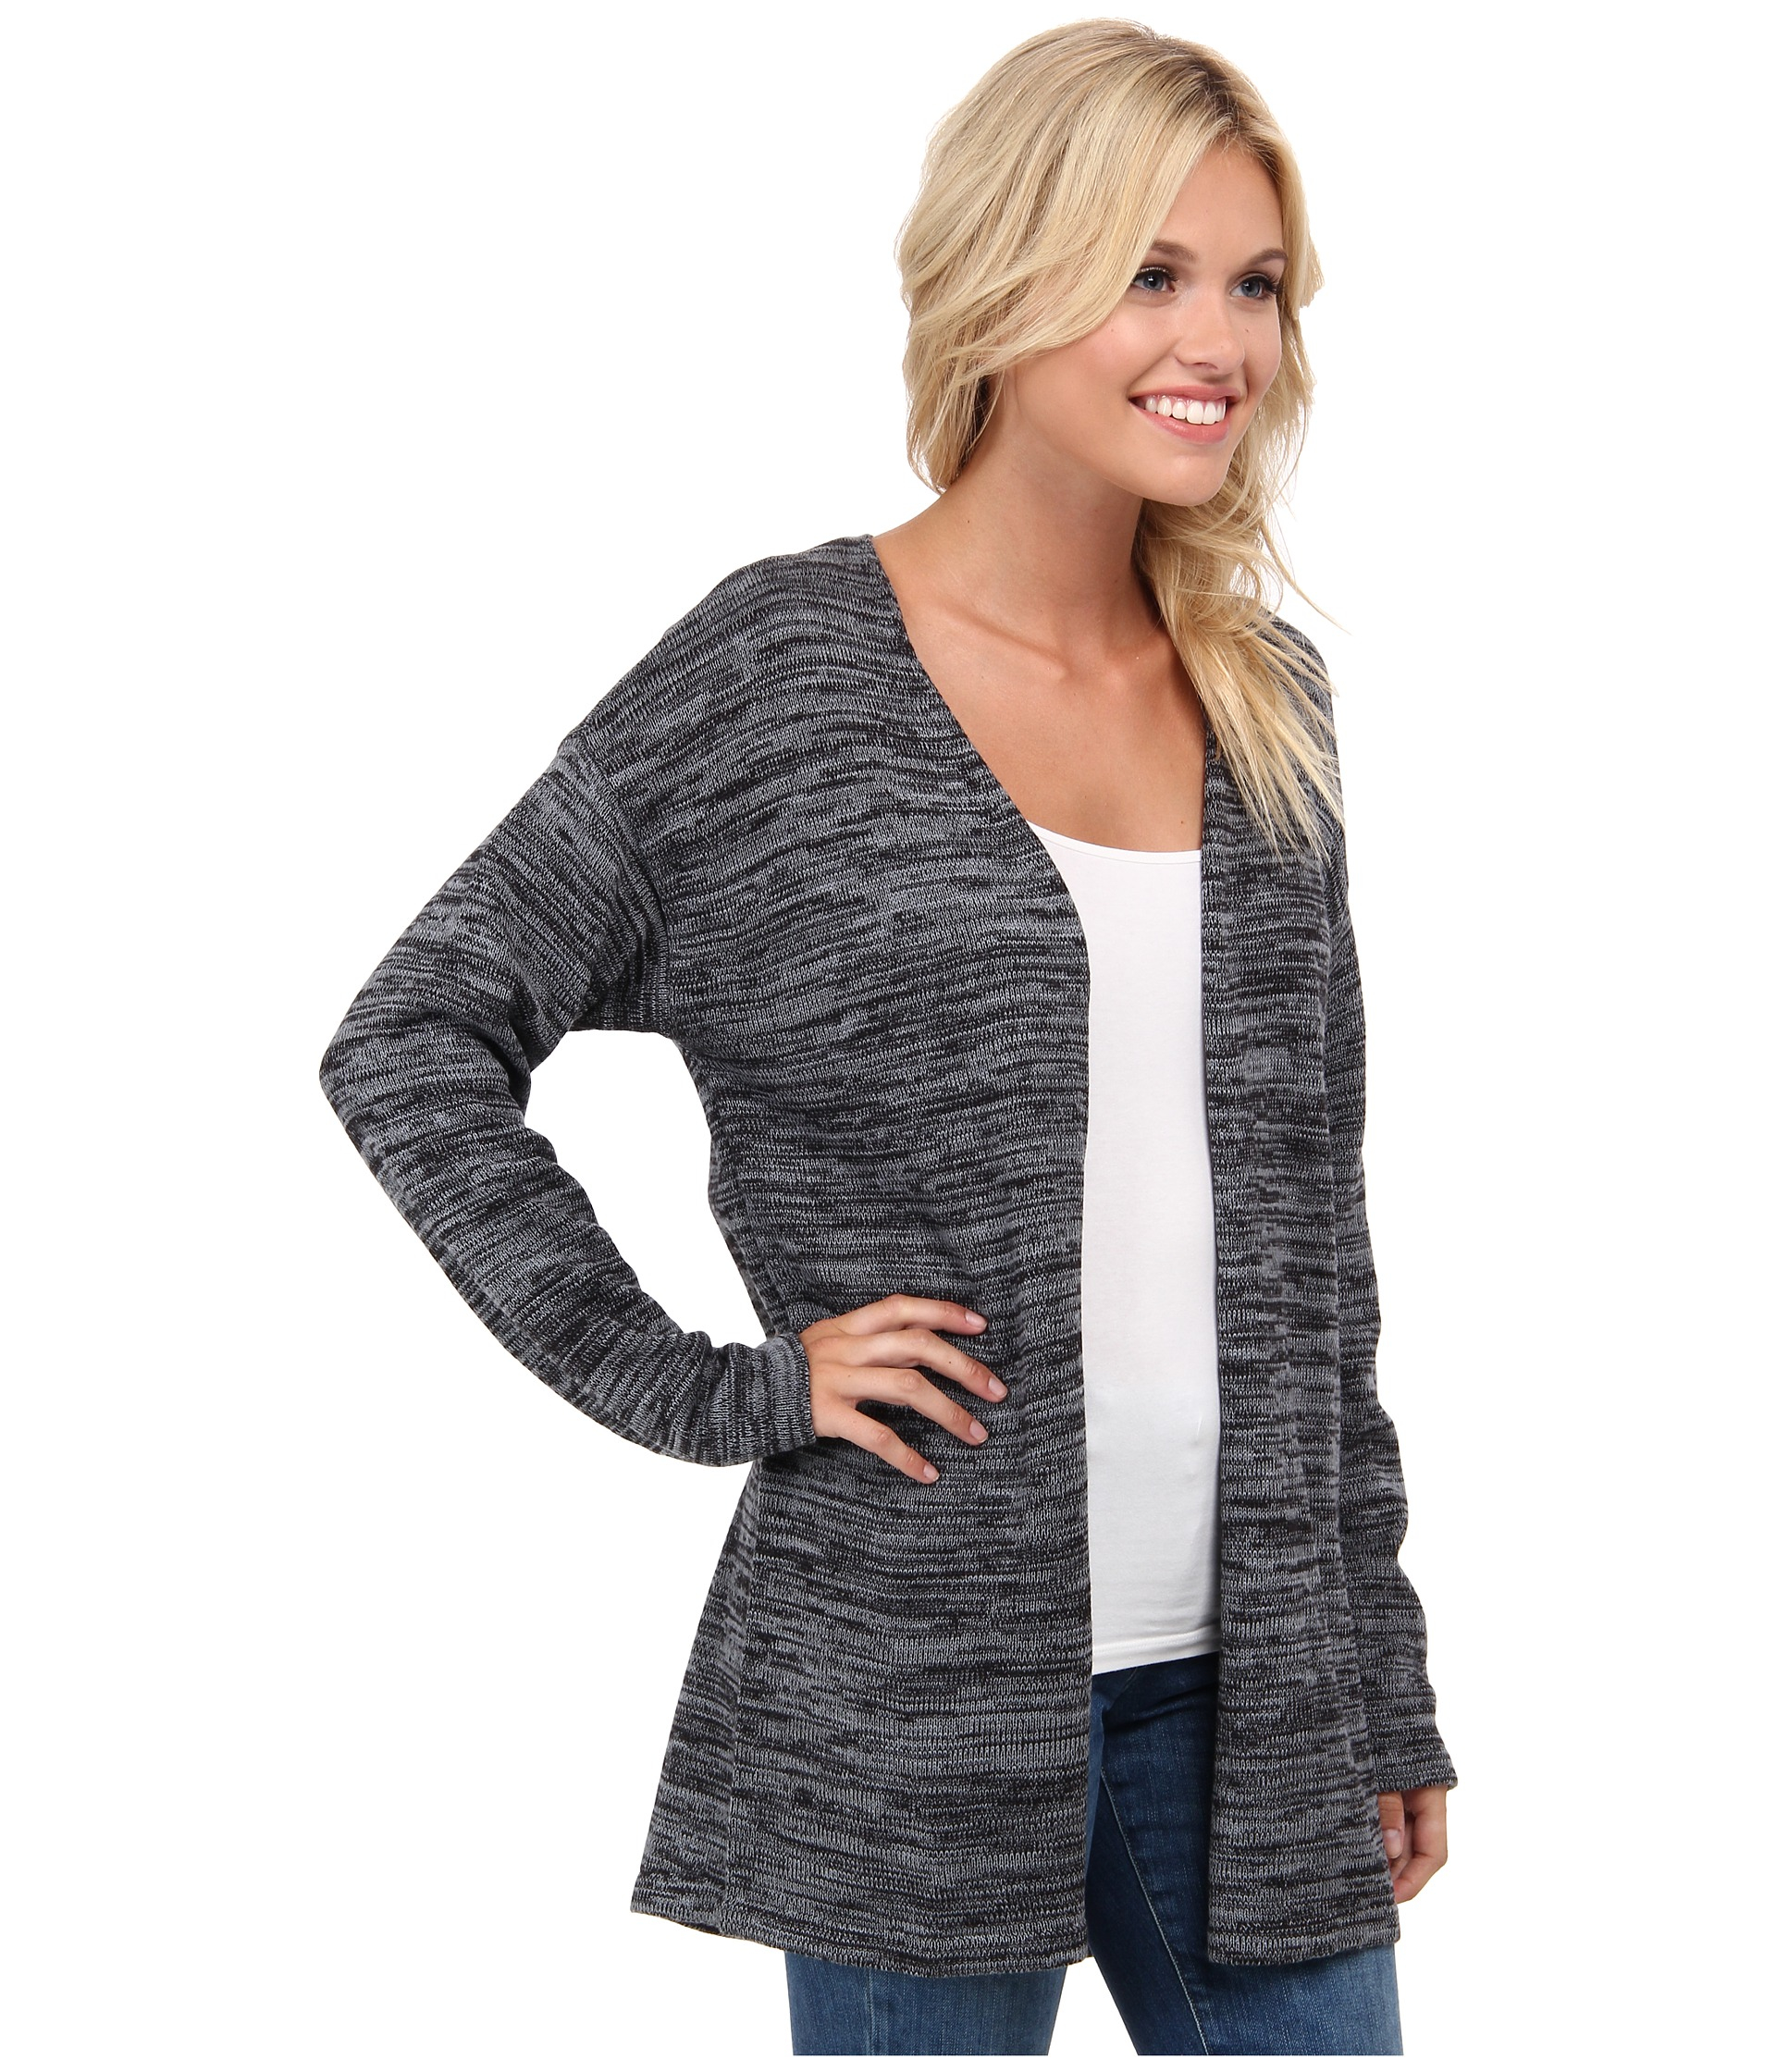 Hurley Rococco Cardigan Sweater in Gray | Lyst